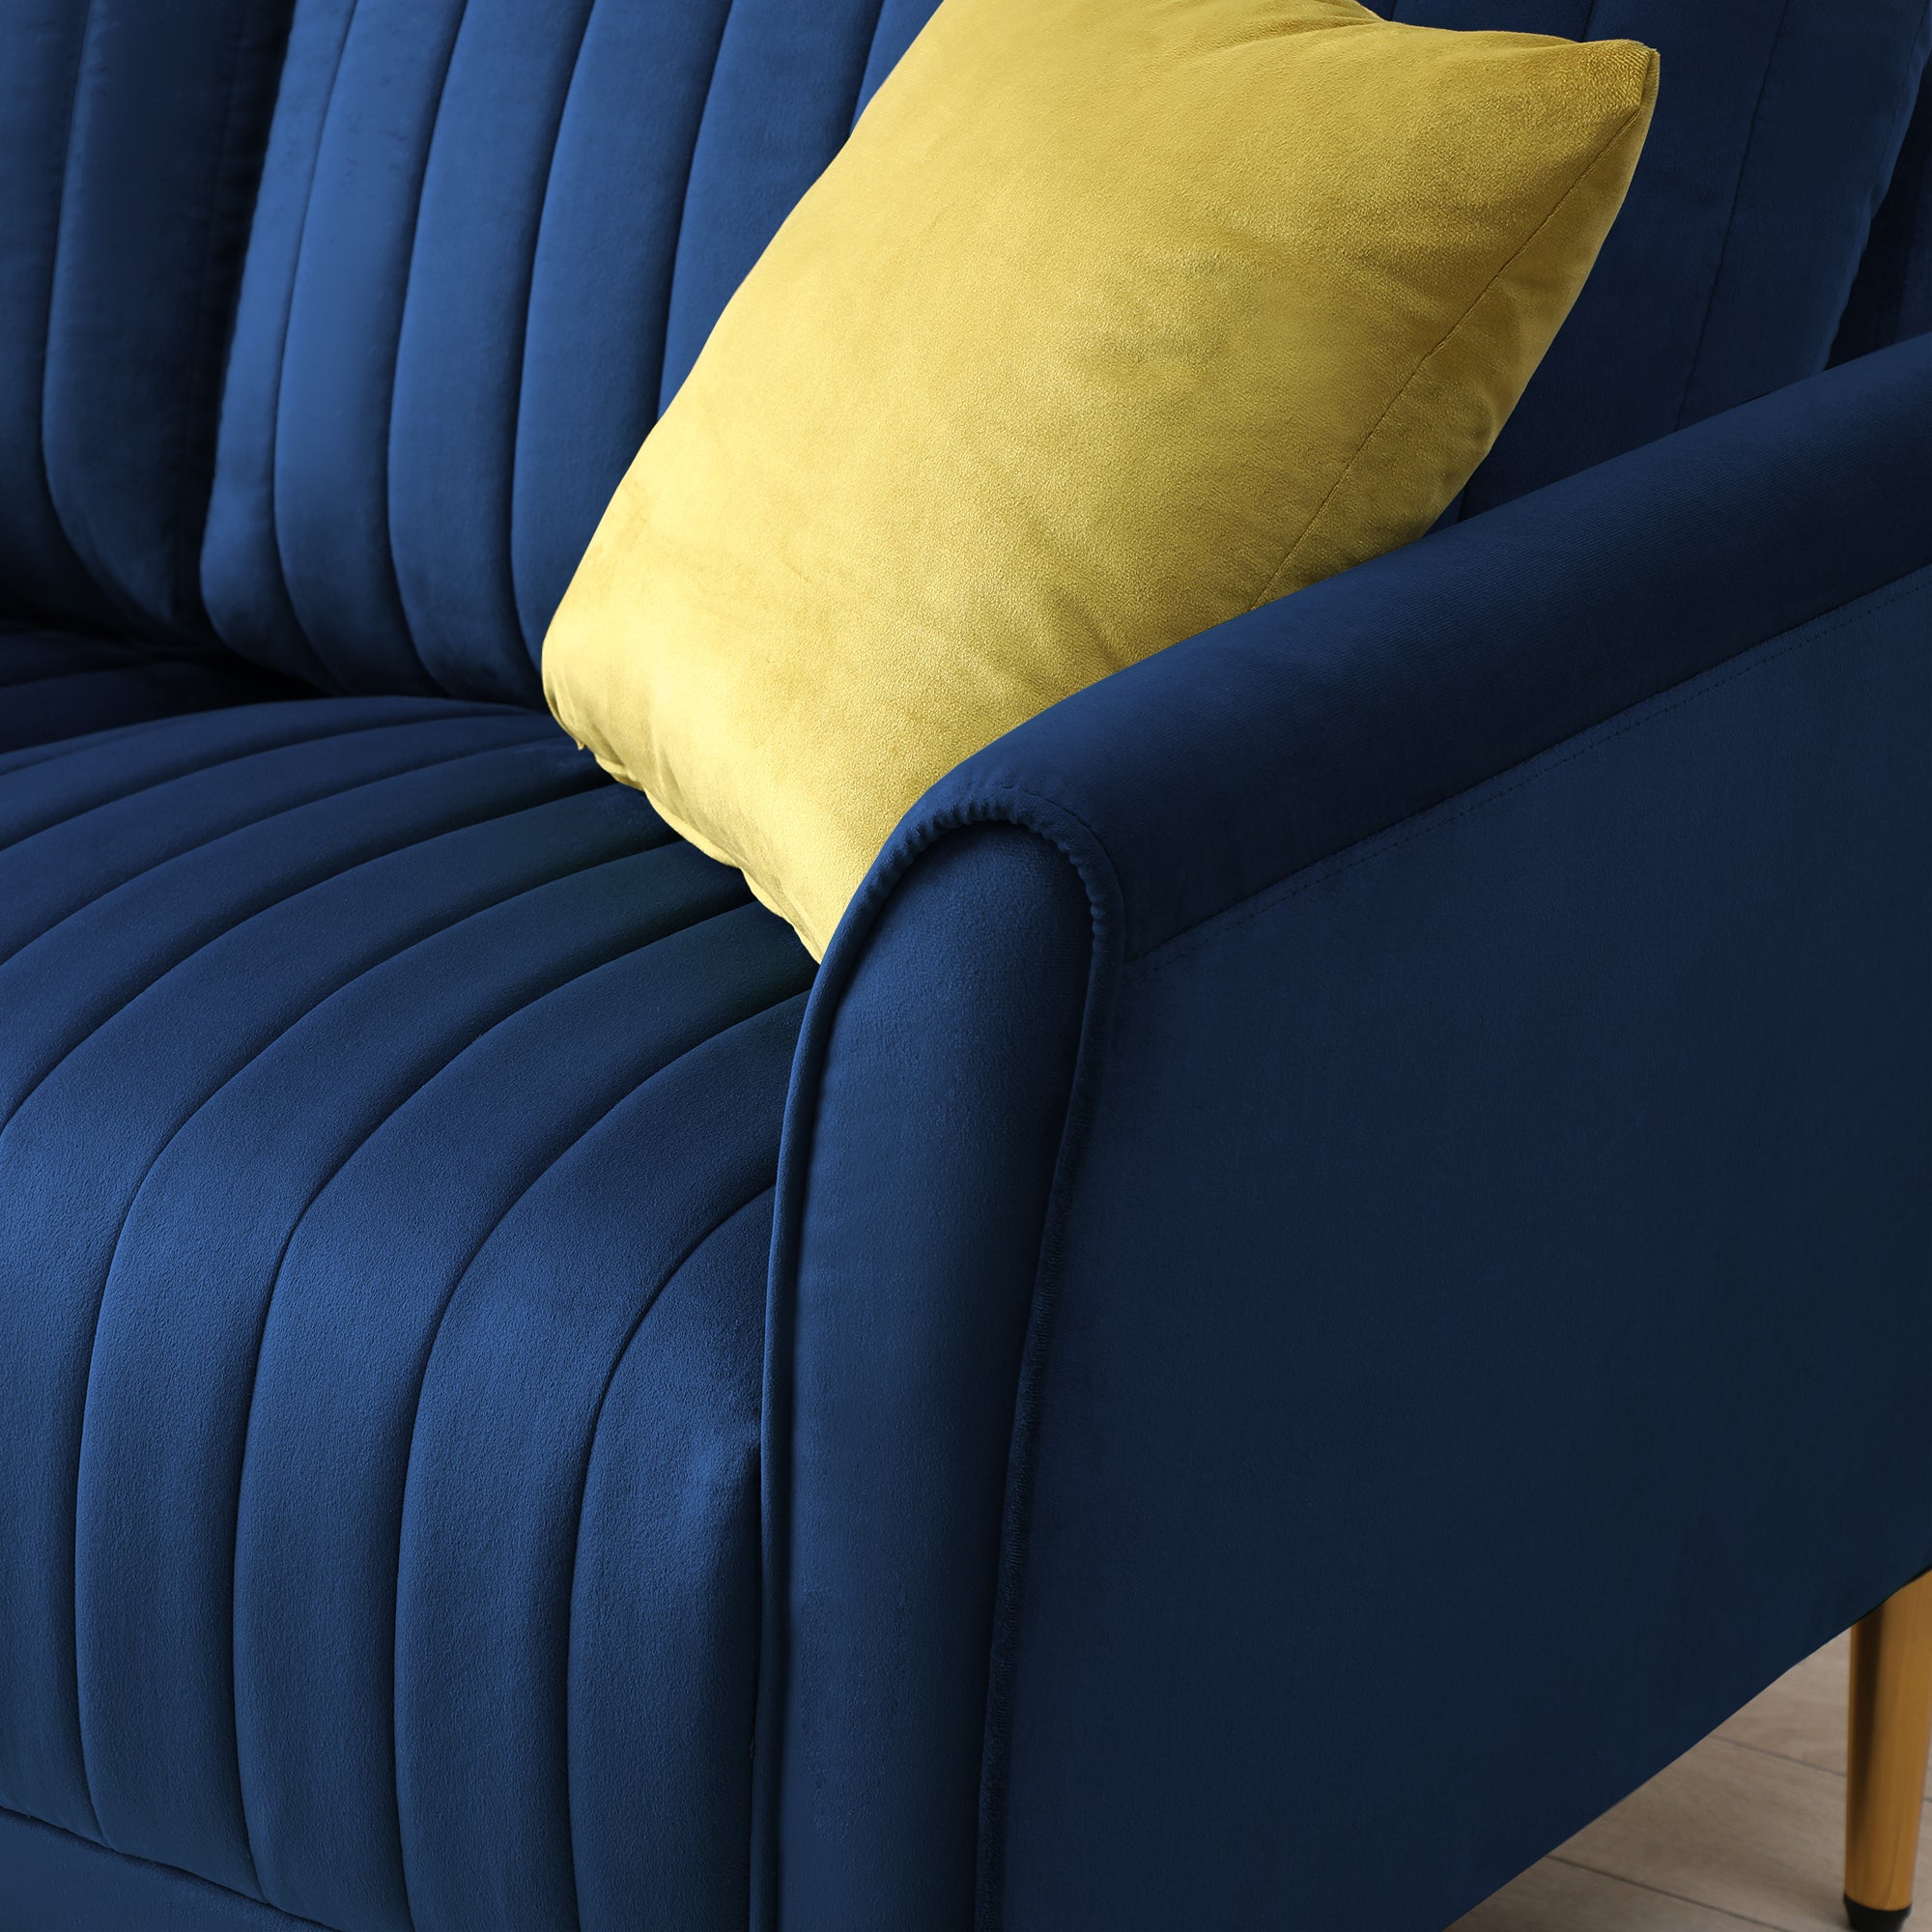 Velvet Accent Chair Round Arm Chair with Gold Legs, Upholstered Single Sofa for Living Room Bedroom, Navy Blue with 1 Throw Pillow